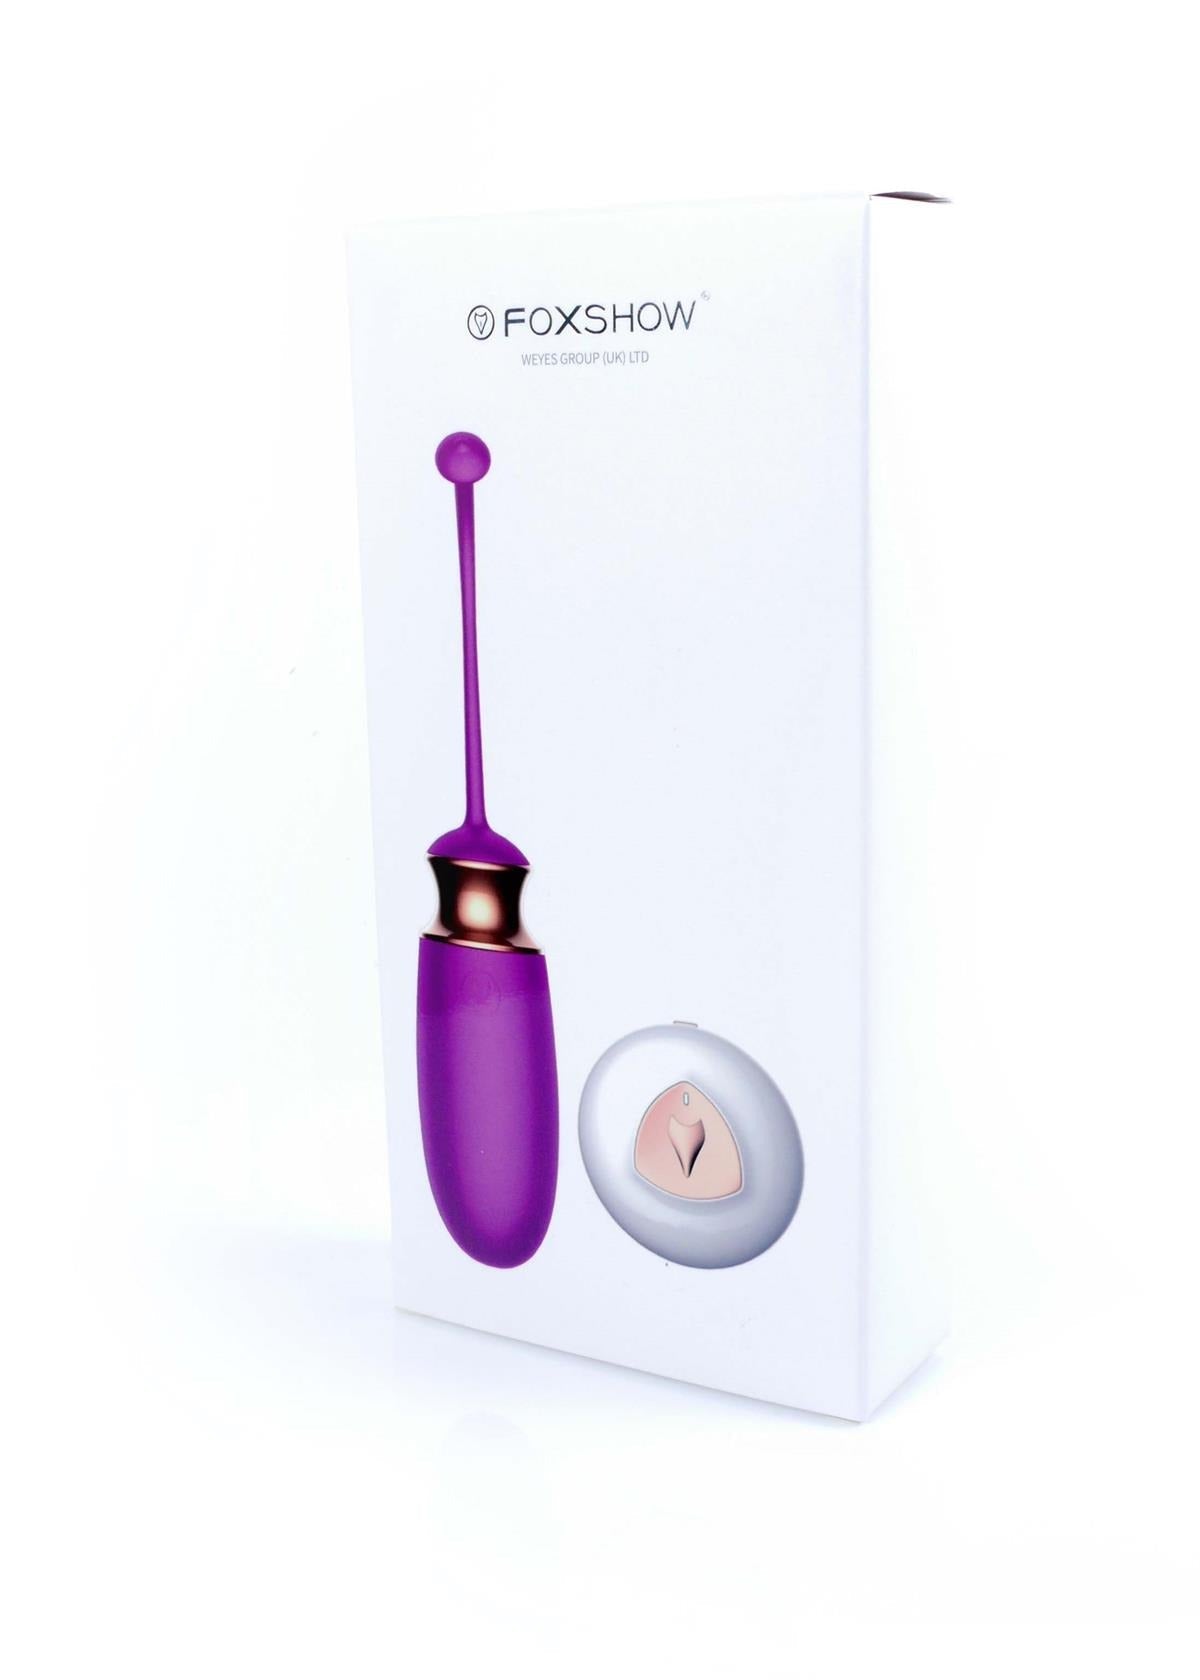 Foxshow - 63-00001 - Vibrating silicone Love egg - Remote control - Rechargeable - 10 function - Heat function - Voice Control - Colour box